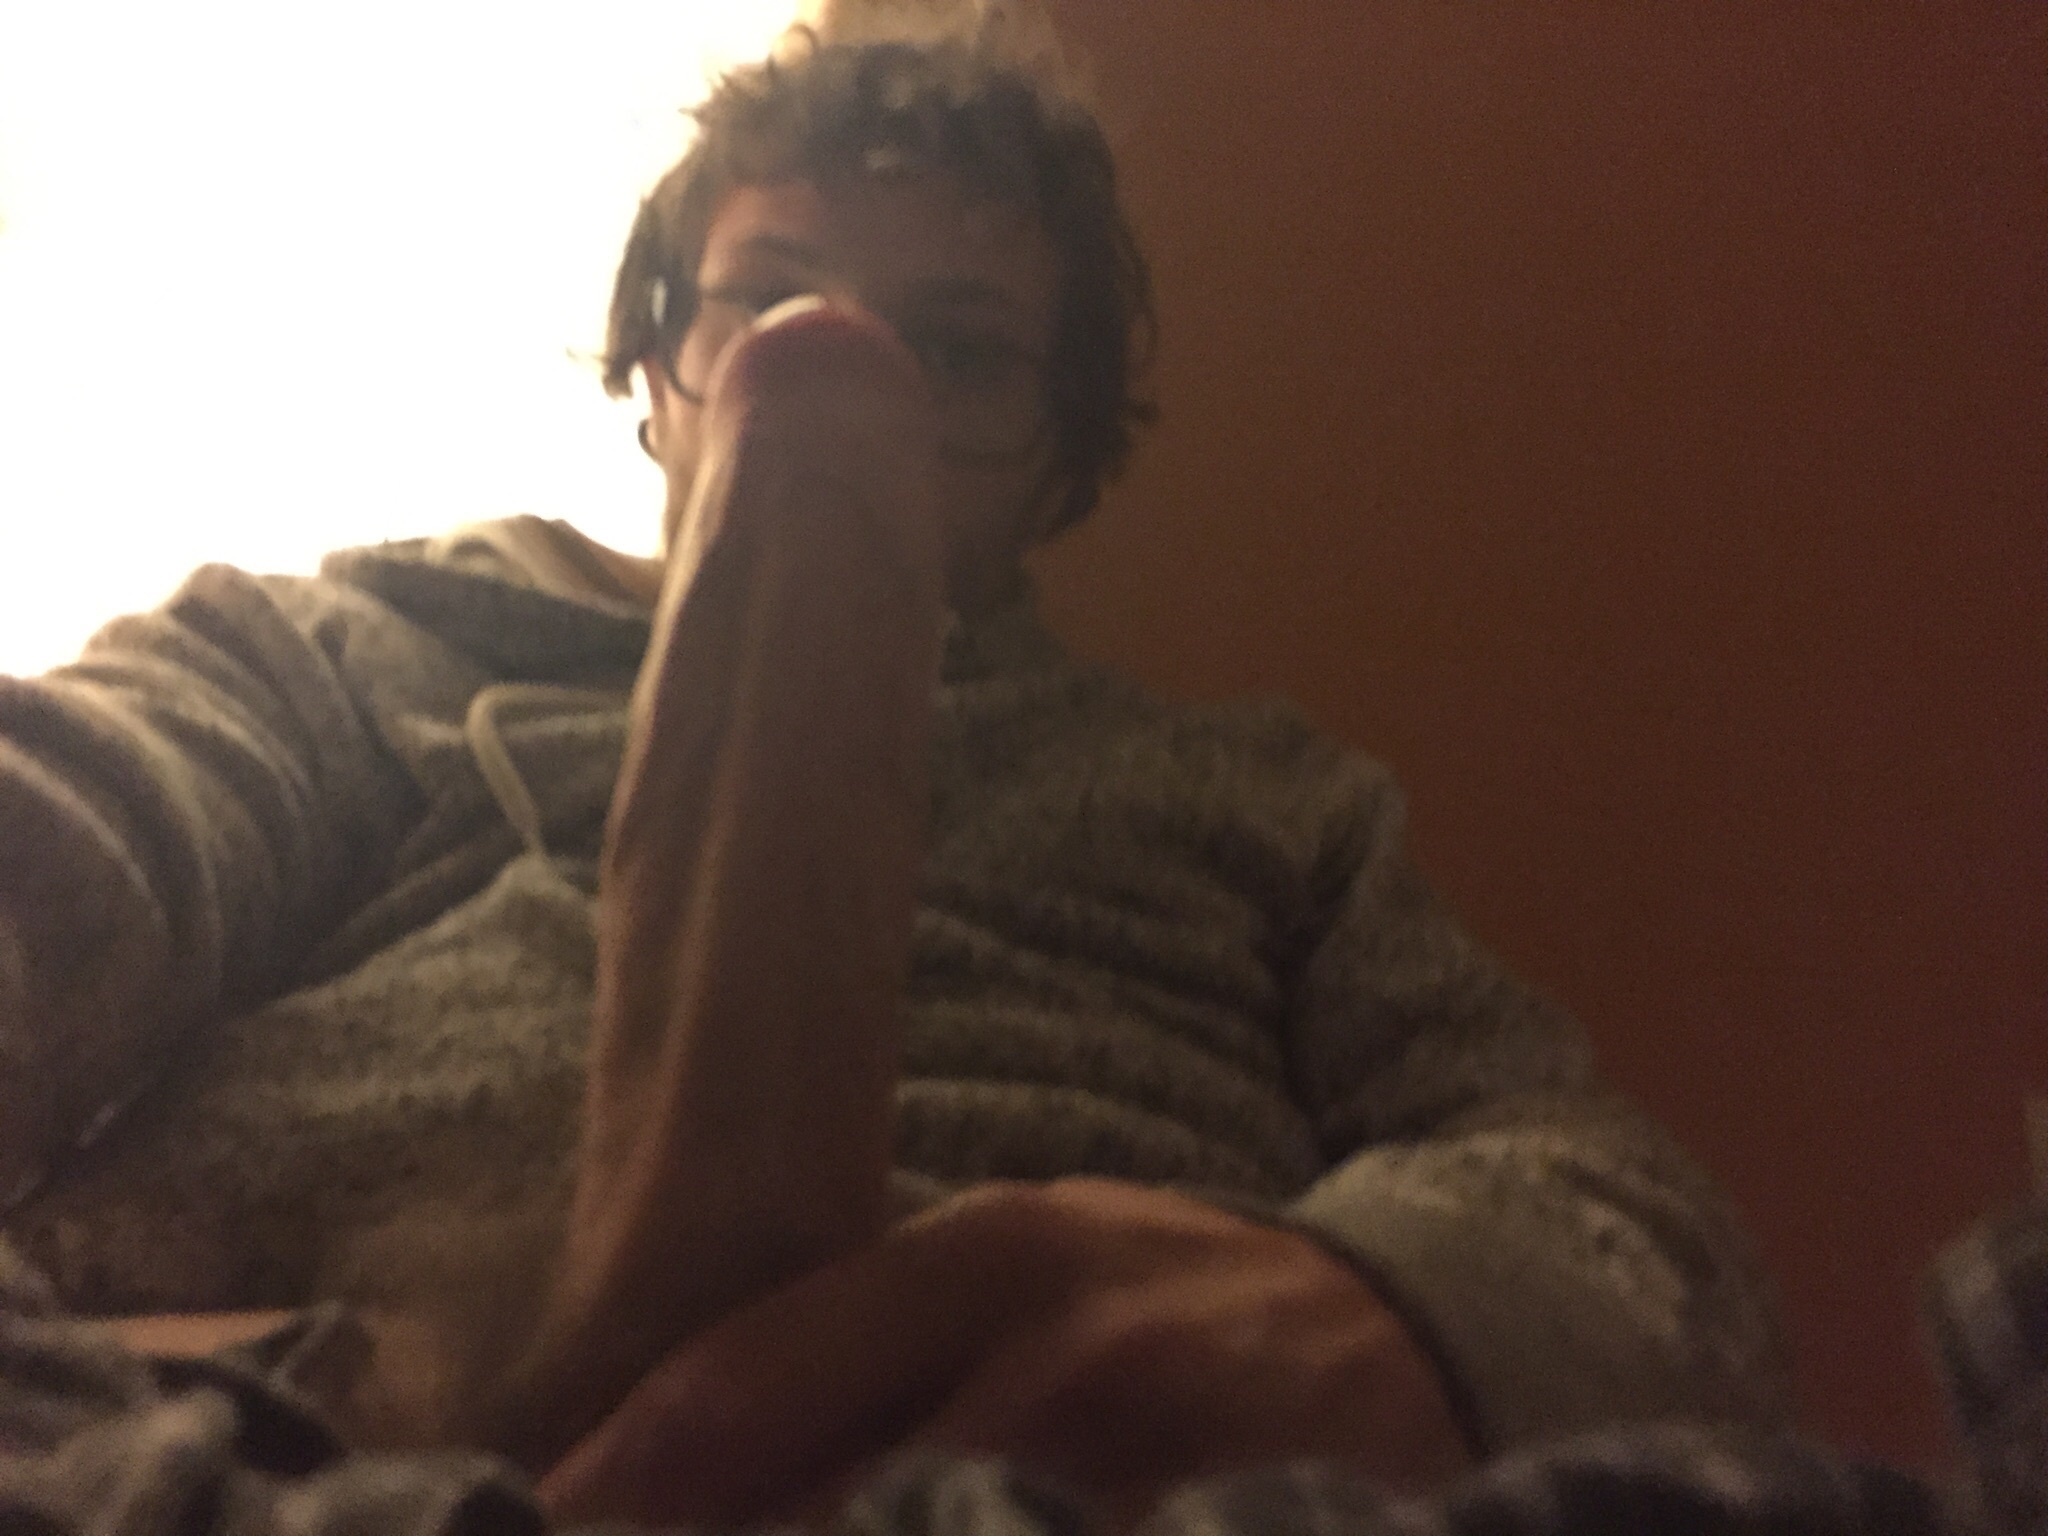 touched my dick free amateur thumbnail Fucking Pics Hq